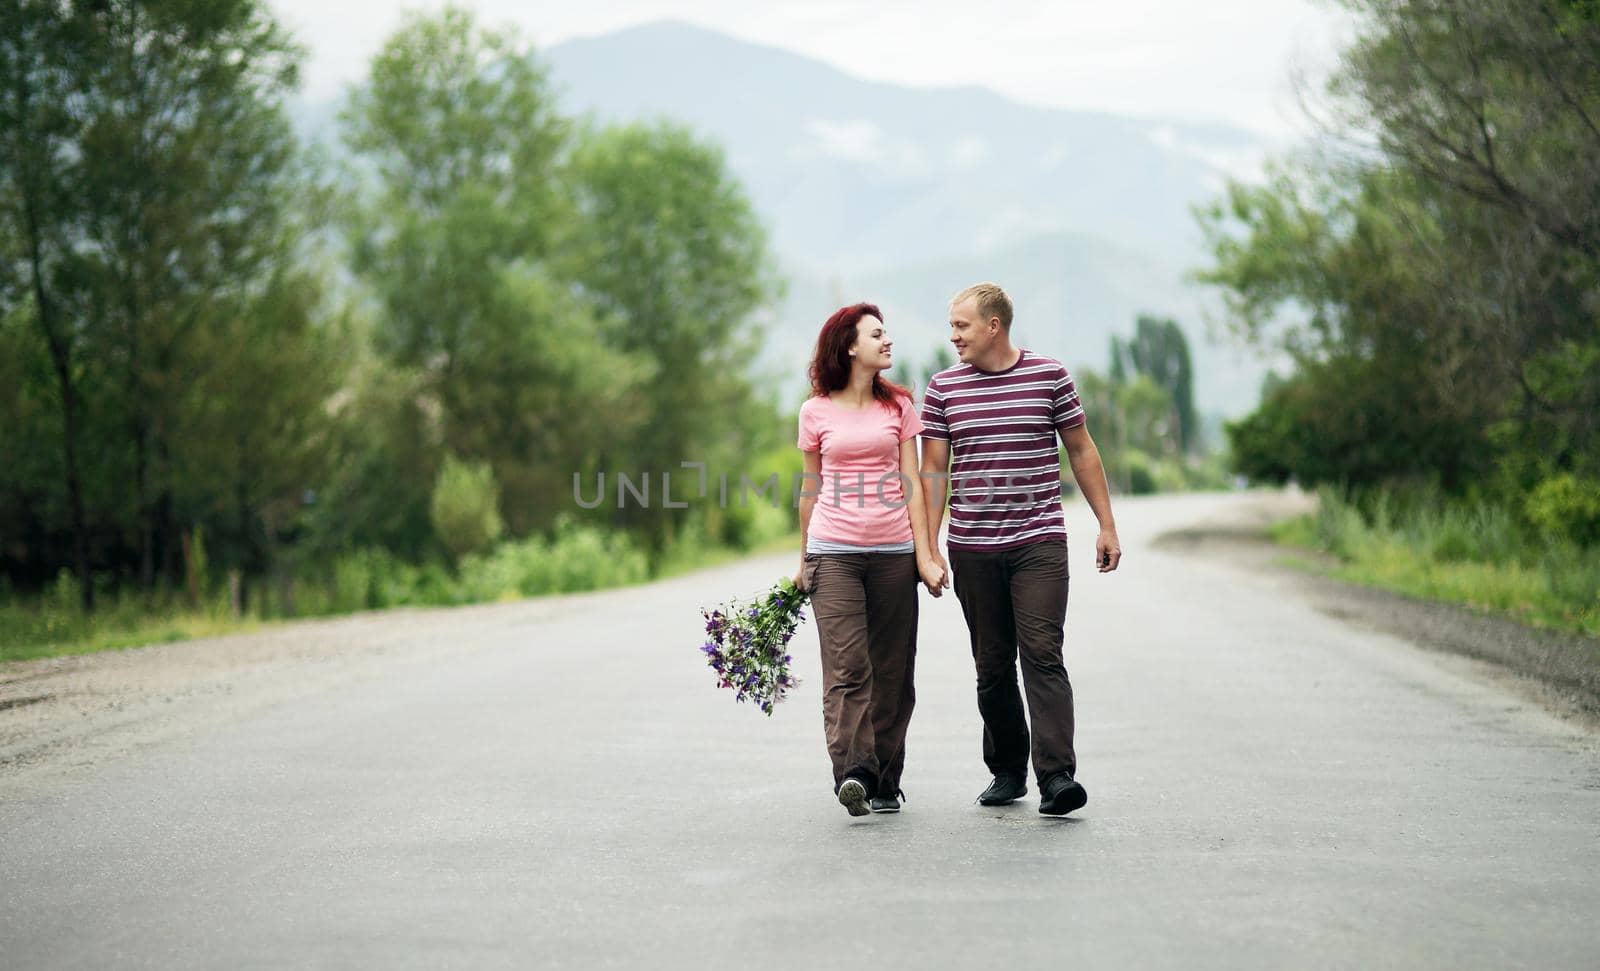 Young happy couple man and woman are walking along an empty road, the girl is holding a bouquet of flowers by selinsmo